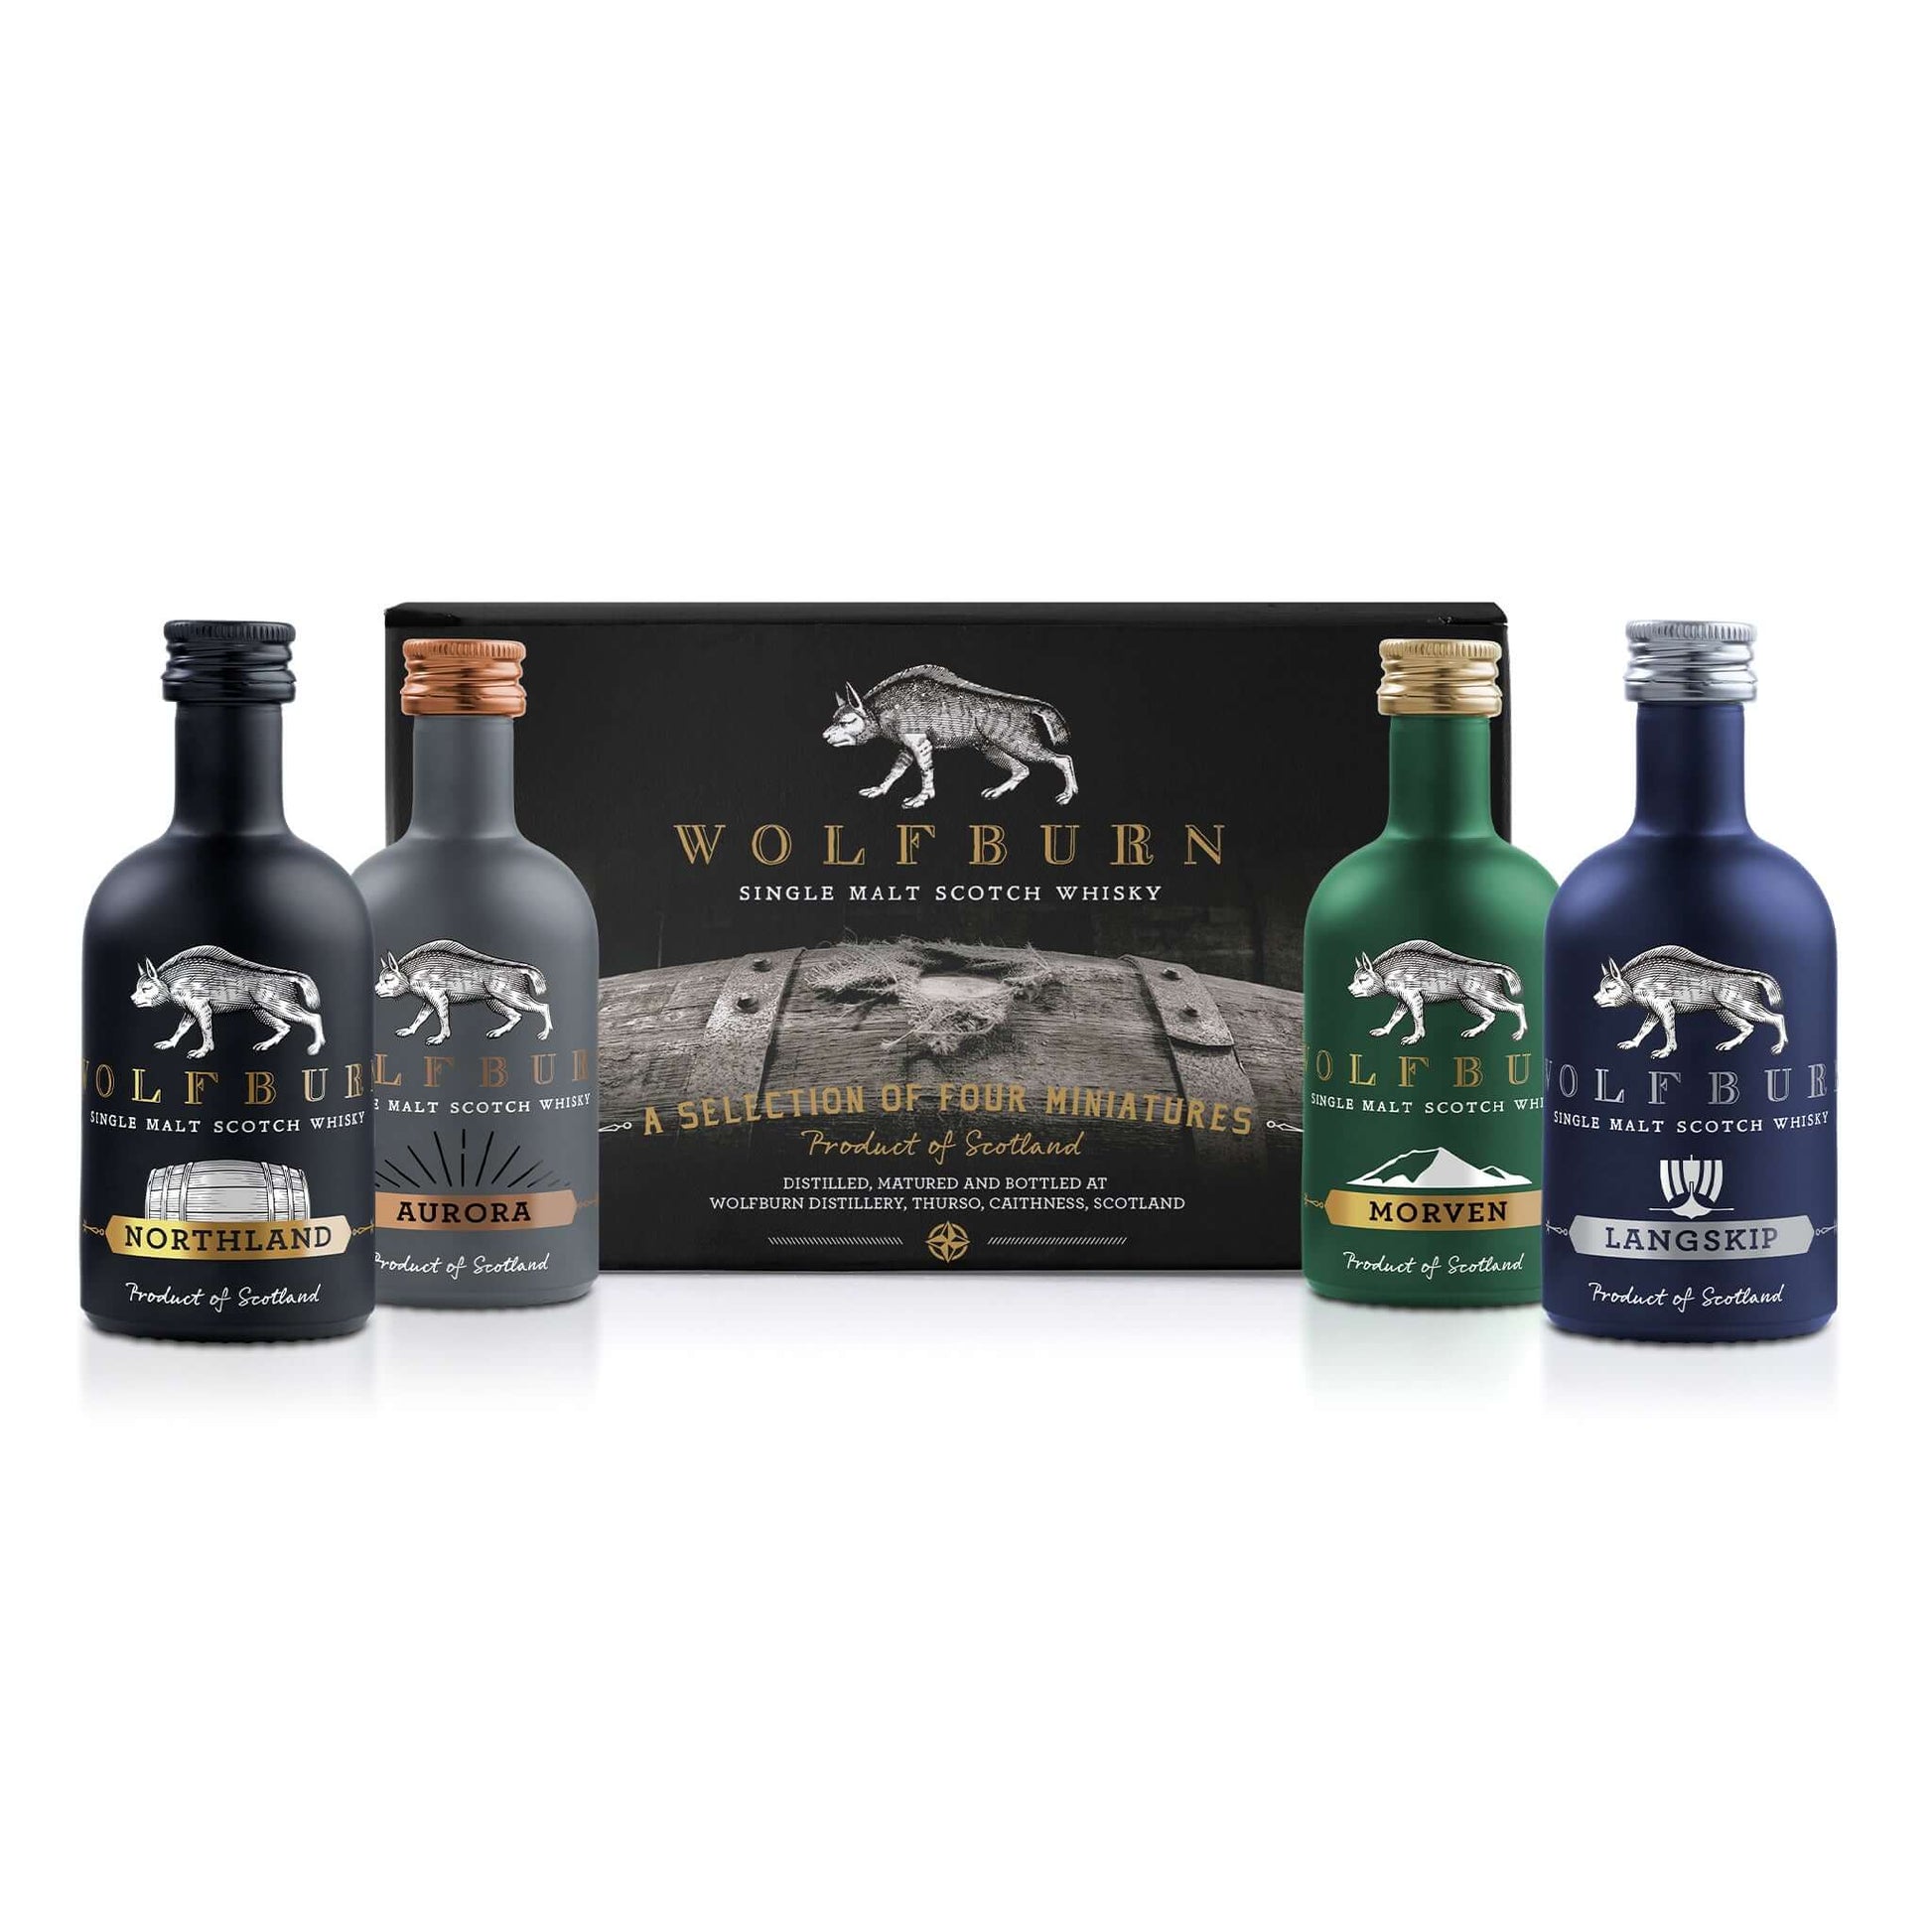 Wolfburn Miniature Quad Pack – 3 x 46% vol. and 1 x 58% vol. 5cl These four conveniently-sized 5cl bottles are a perfect gift for someone special. Or for yourself as a tasting treat, featuring the four core expressions of Wolfburn.